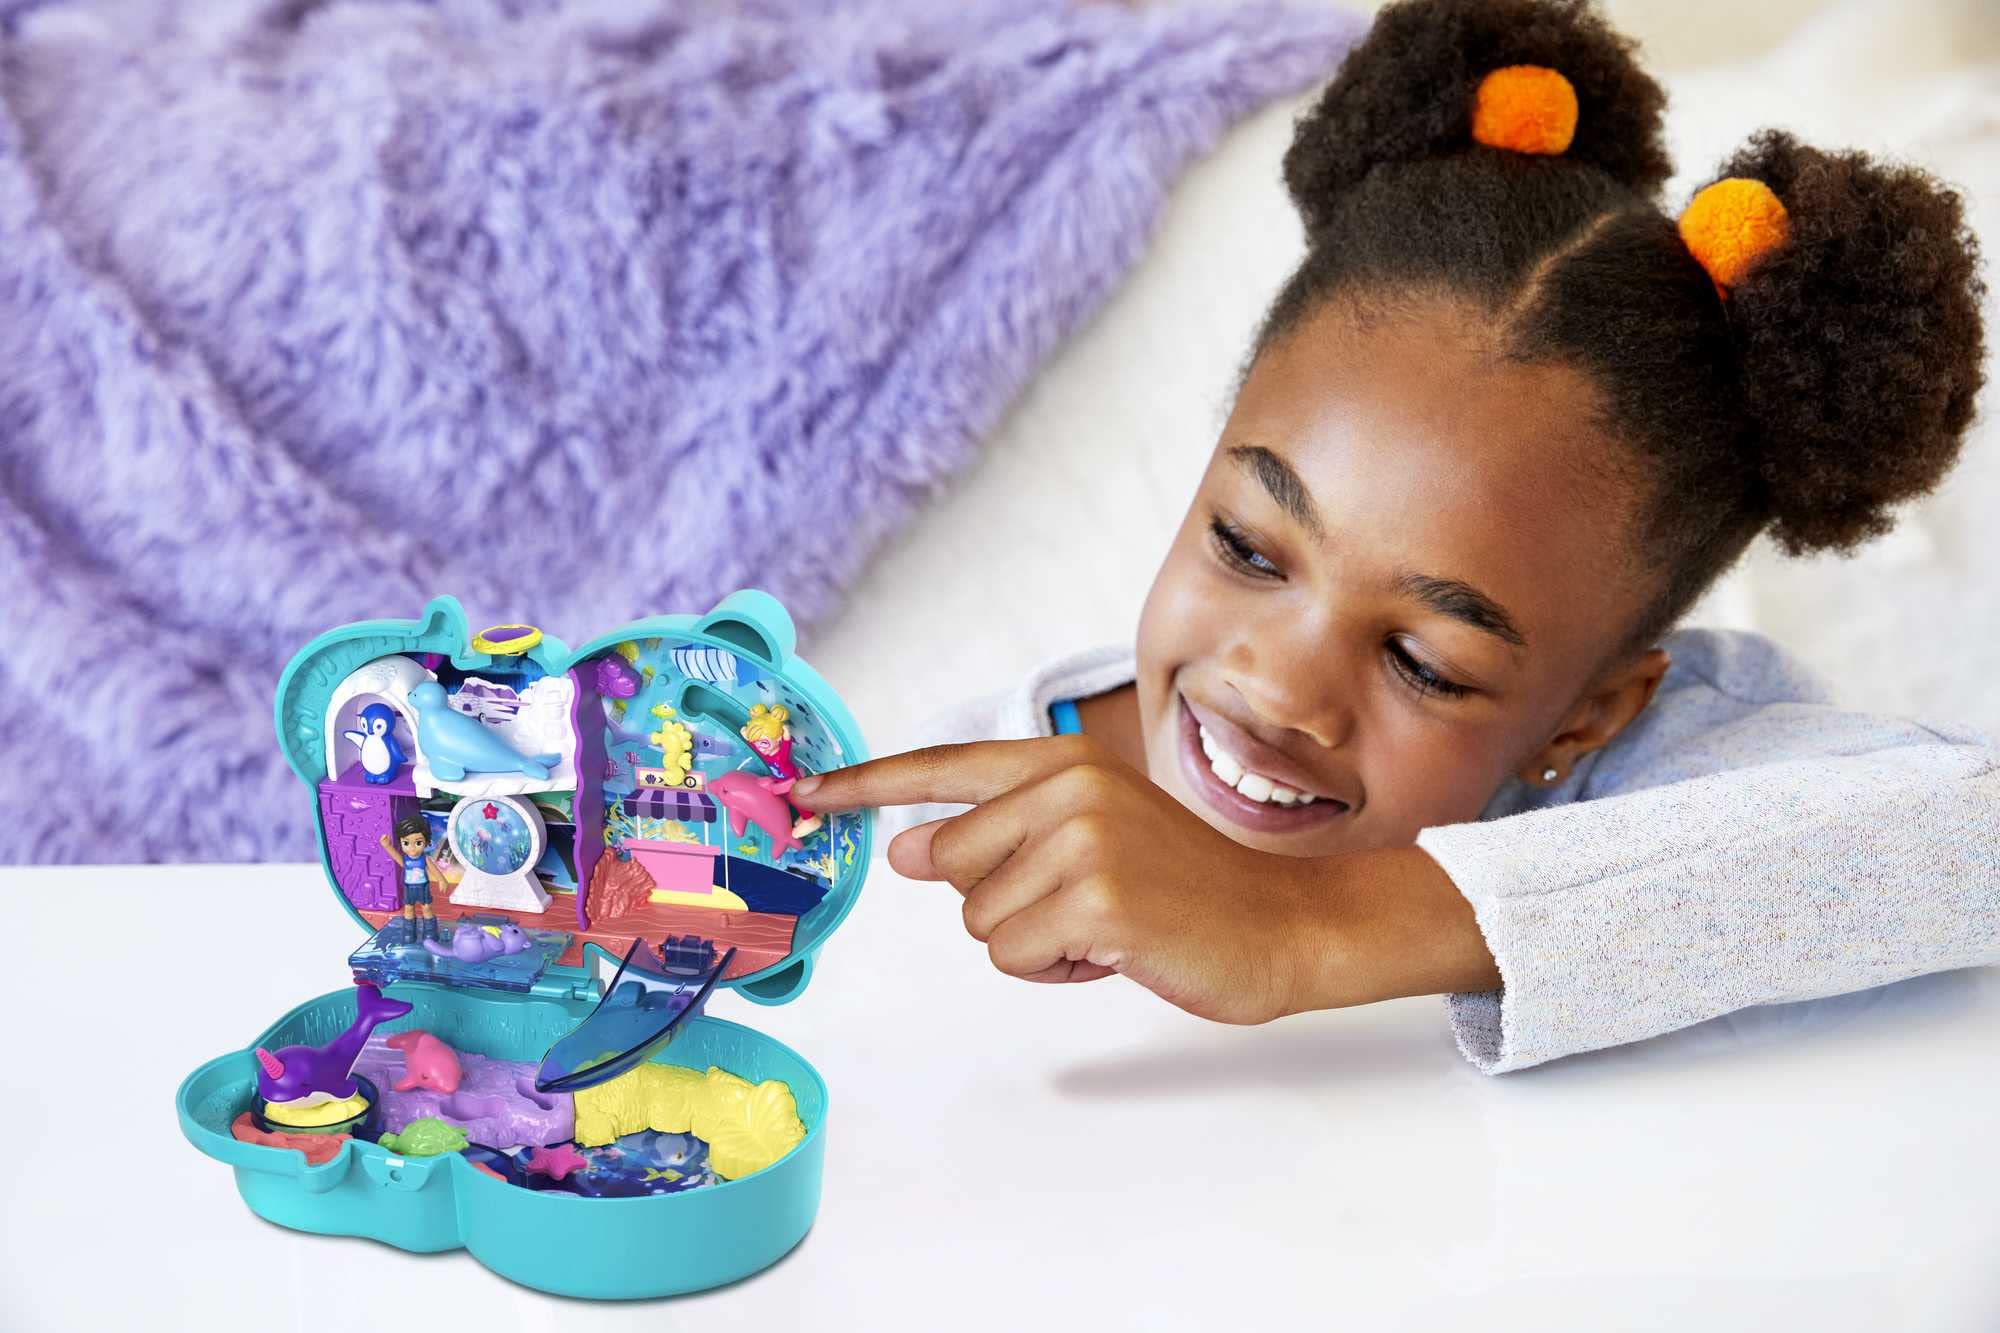 Polly Pocket Compact Playset, Otter Aquarium with 2 Micro Dolls & Accessories, Travel Toys with Surprise Reveals